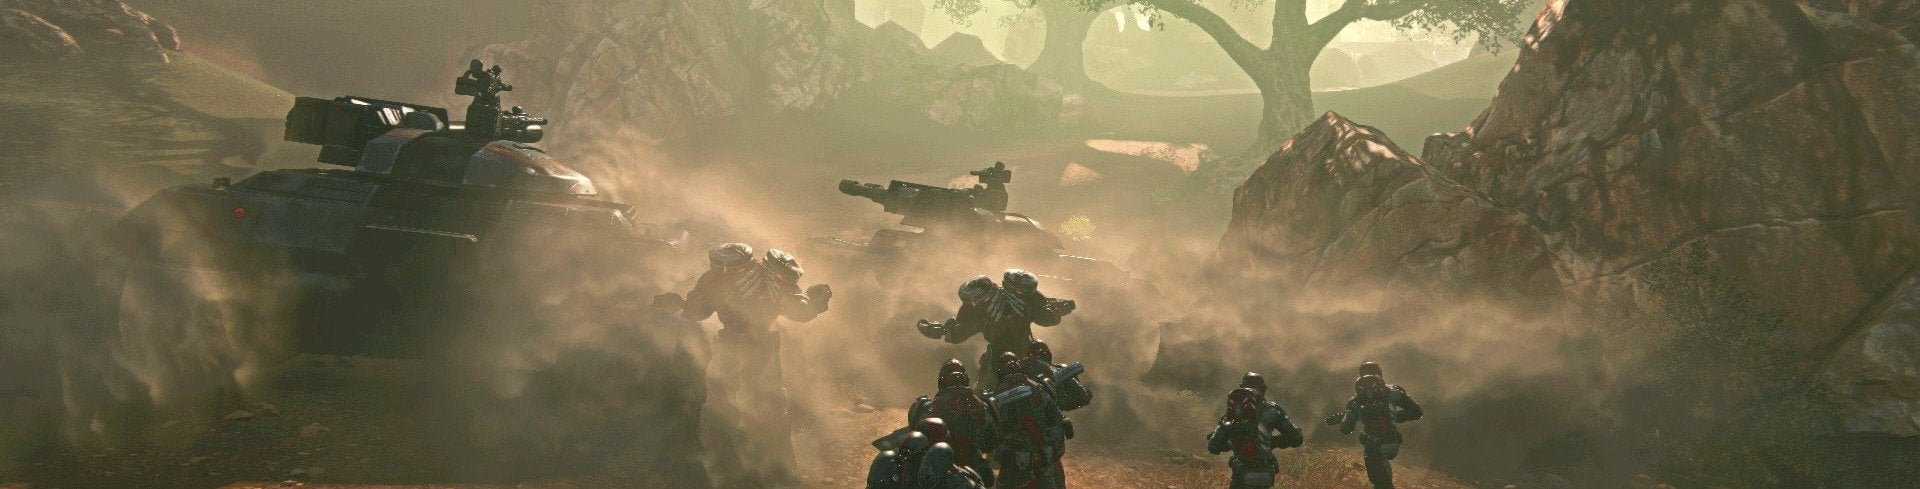 Image for The search for PlanetSide 2's largest battle